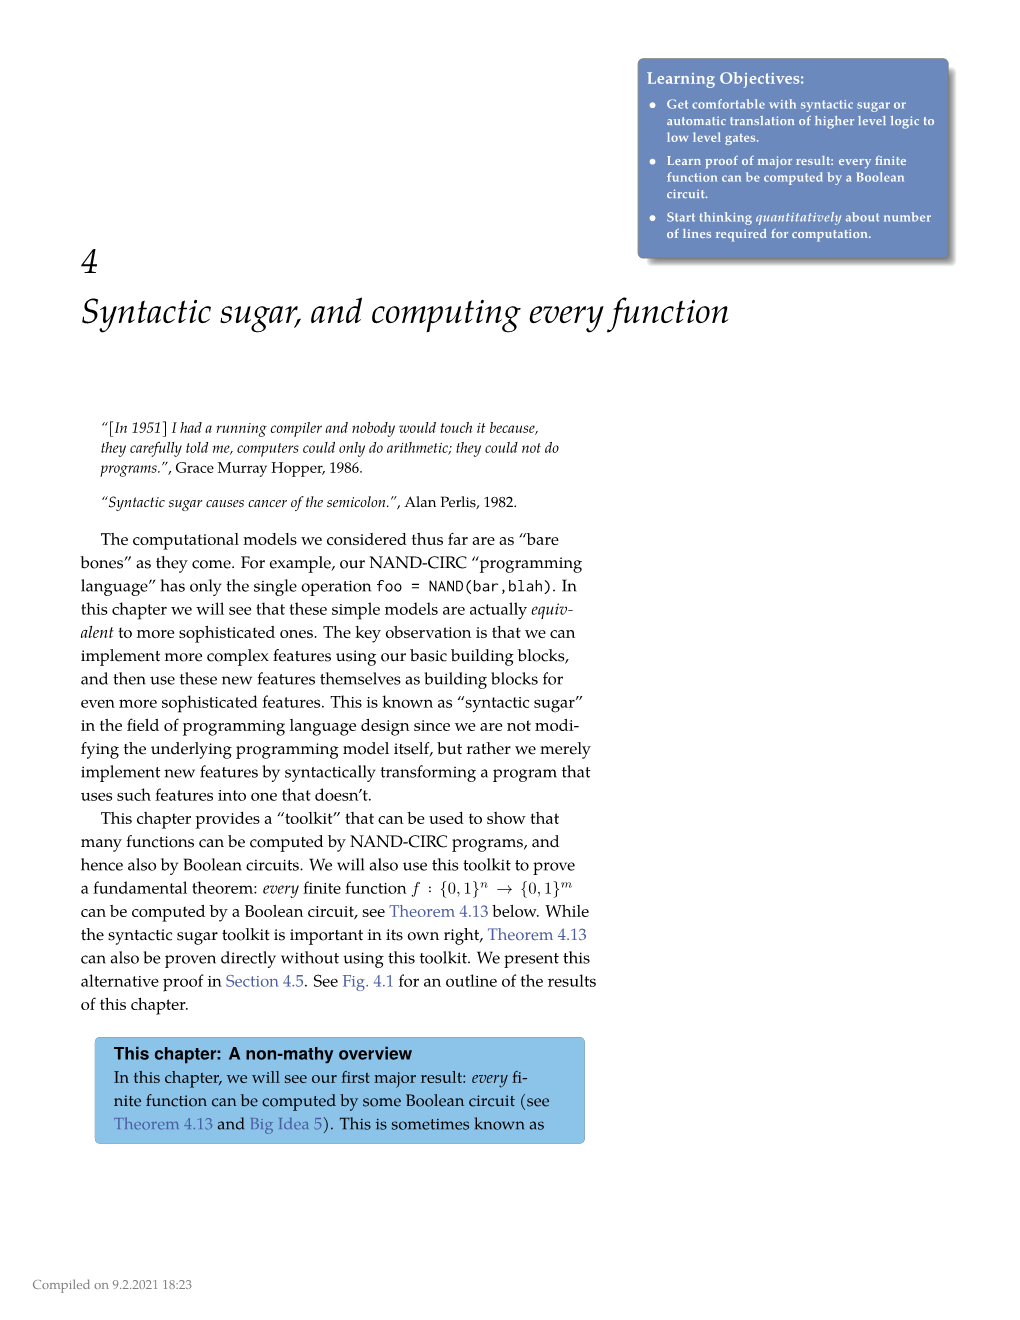 4 Syntactic Sugar, and Computing Every Function